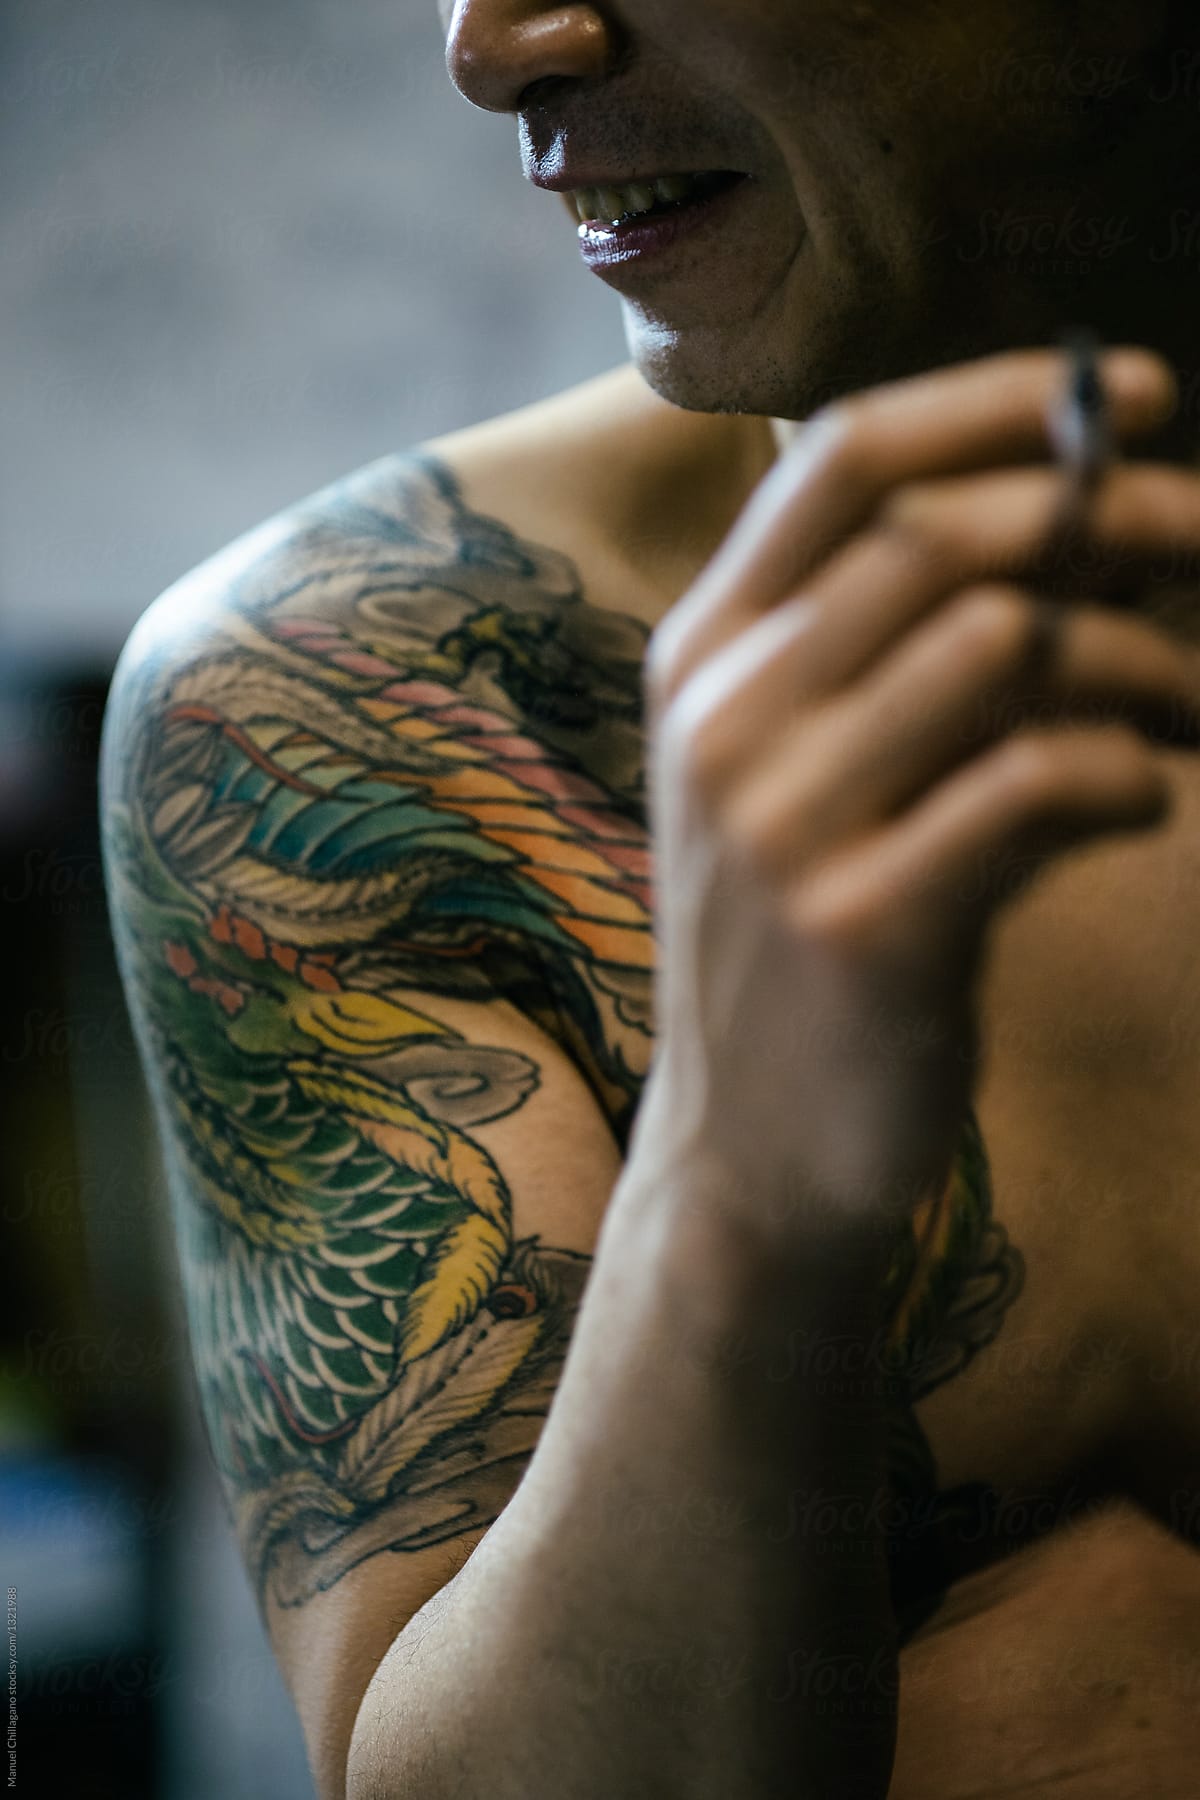 Smiling Japanese male with a cigarette in his hand and a tattoo on his right shoulder